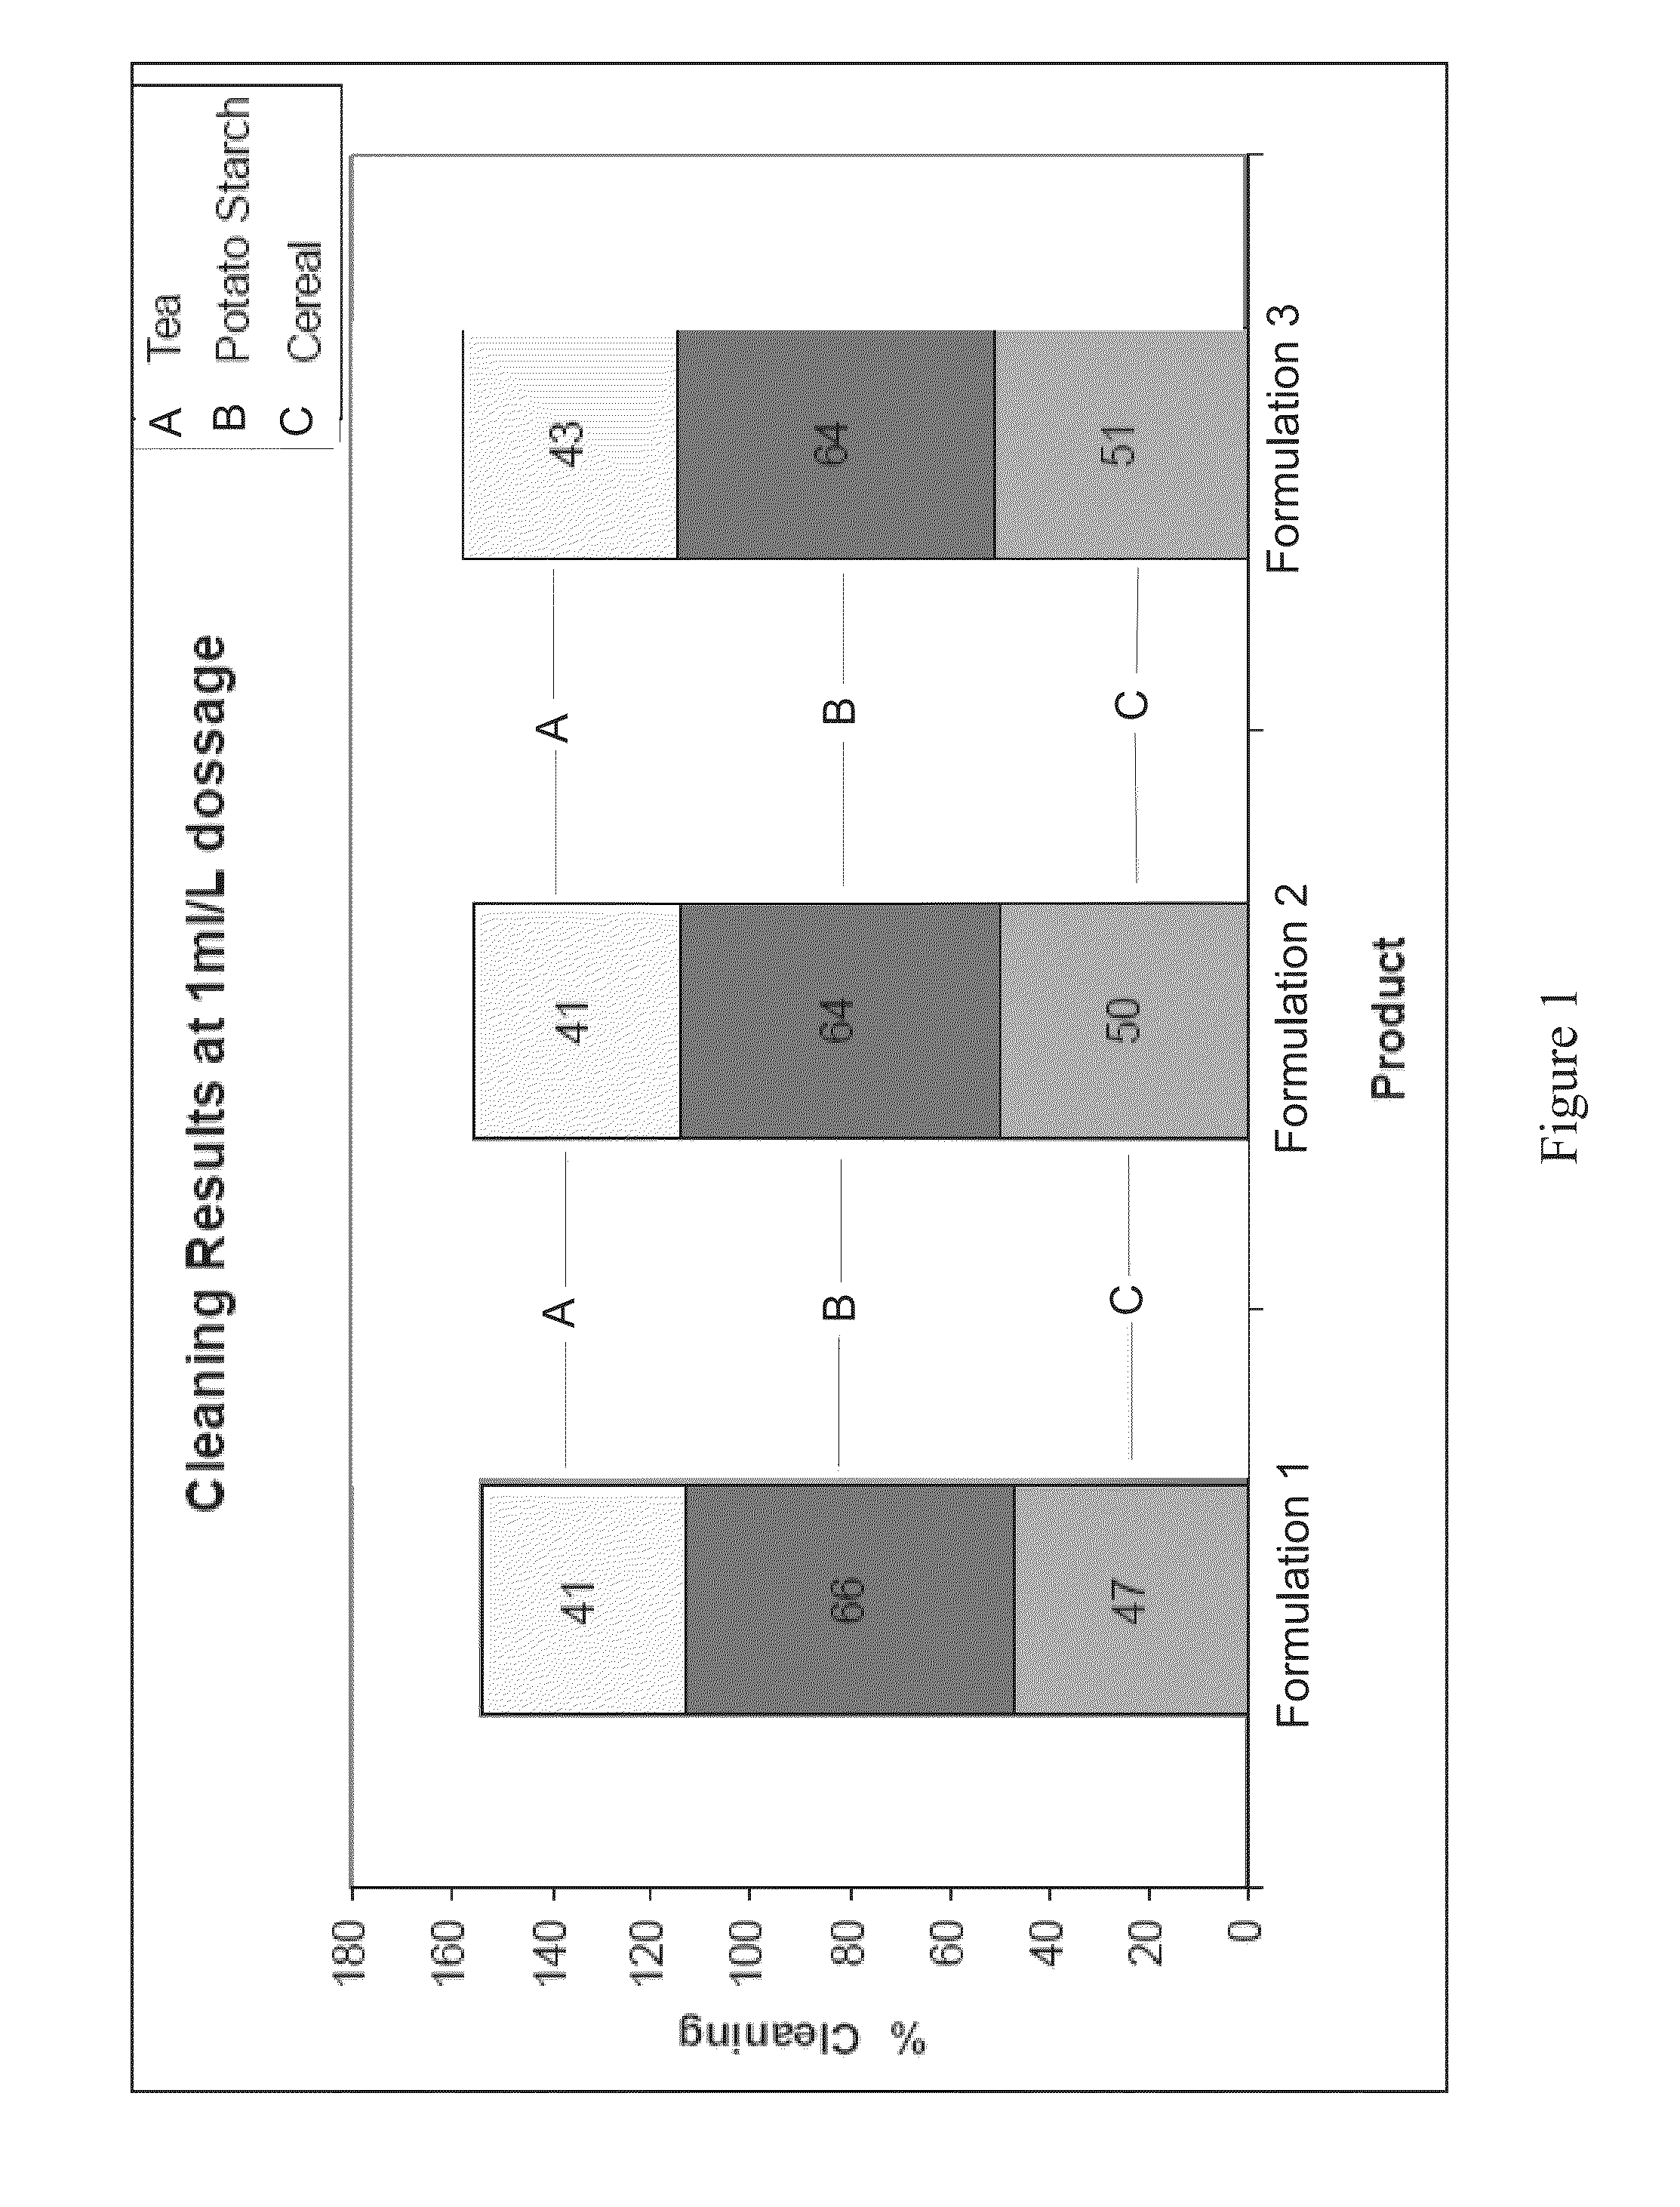 Scale-inhibition compositions and methods of making and using the same